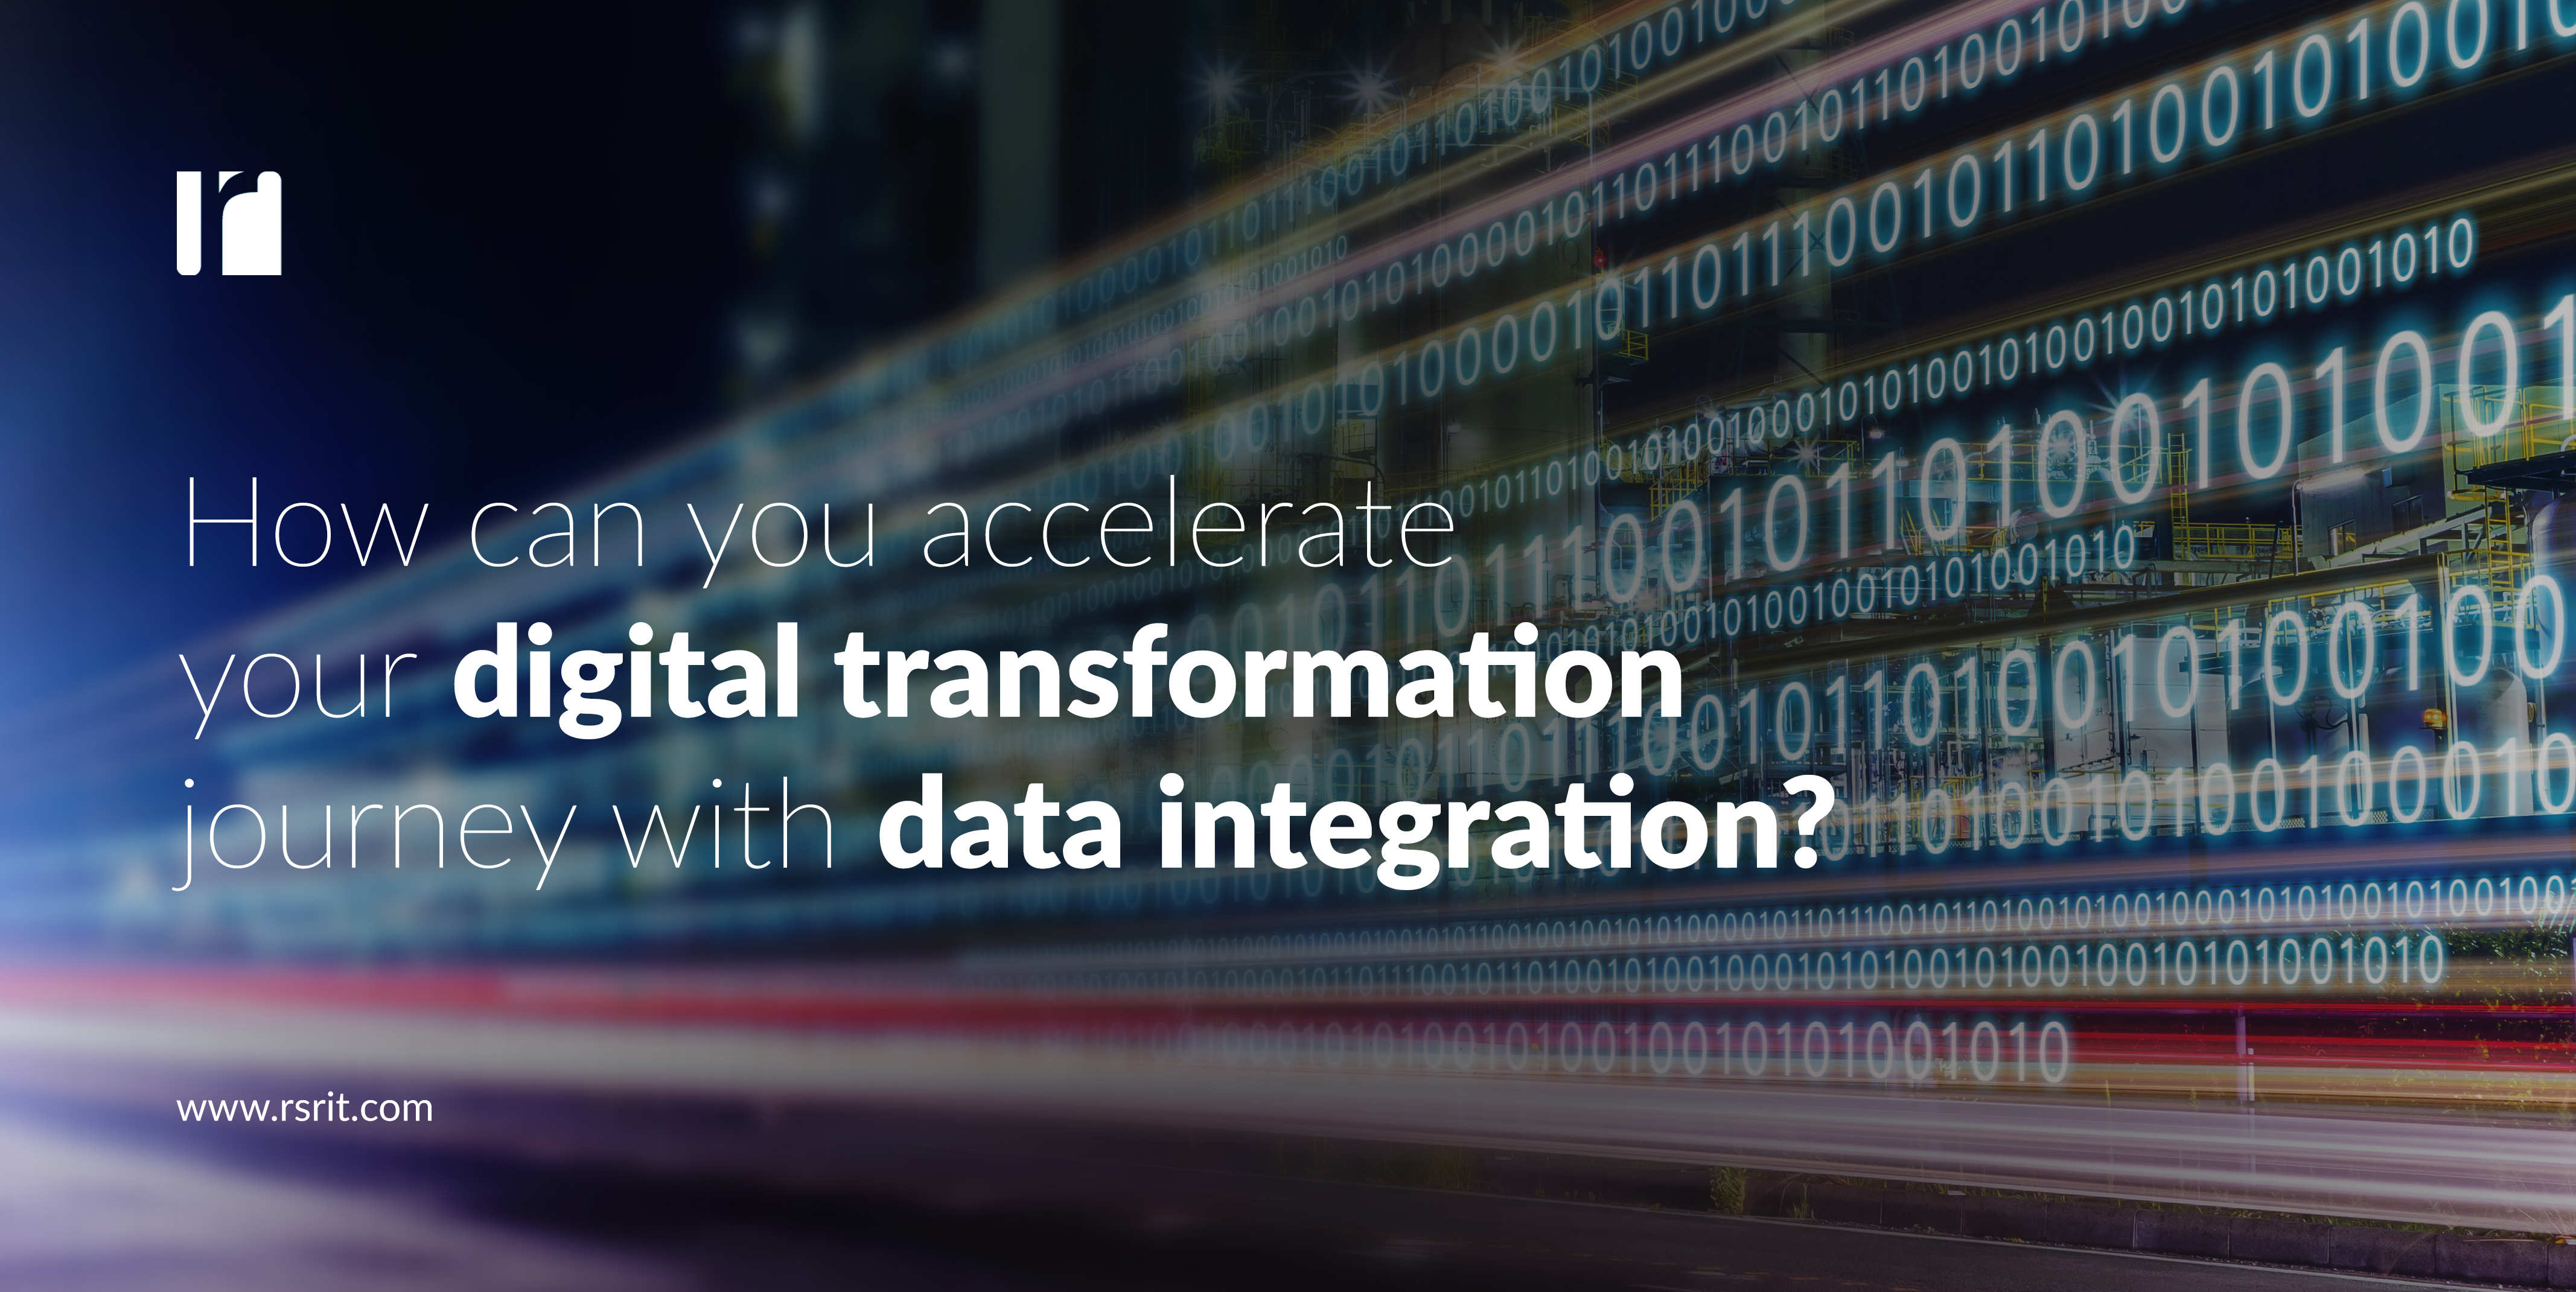 How can you accelerate your digital transformation journey with data integration?